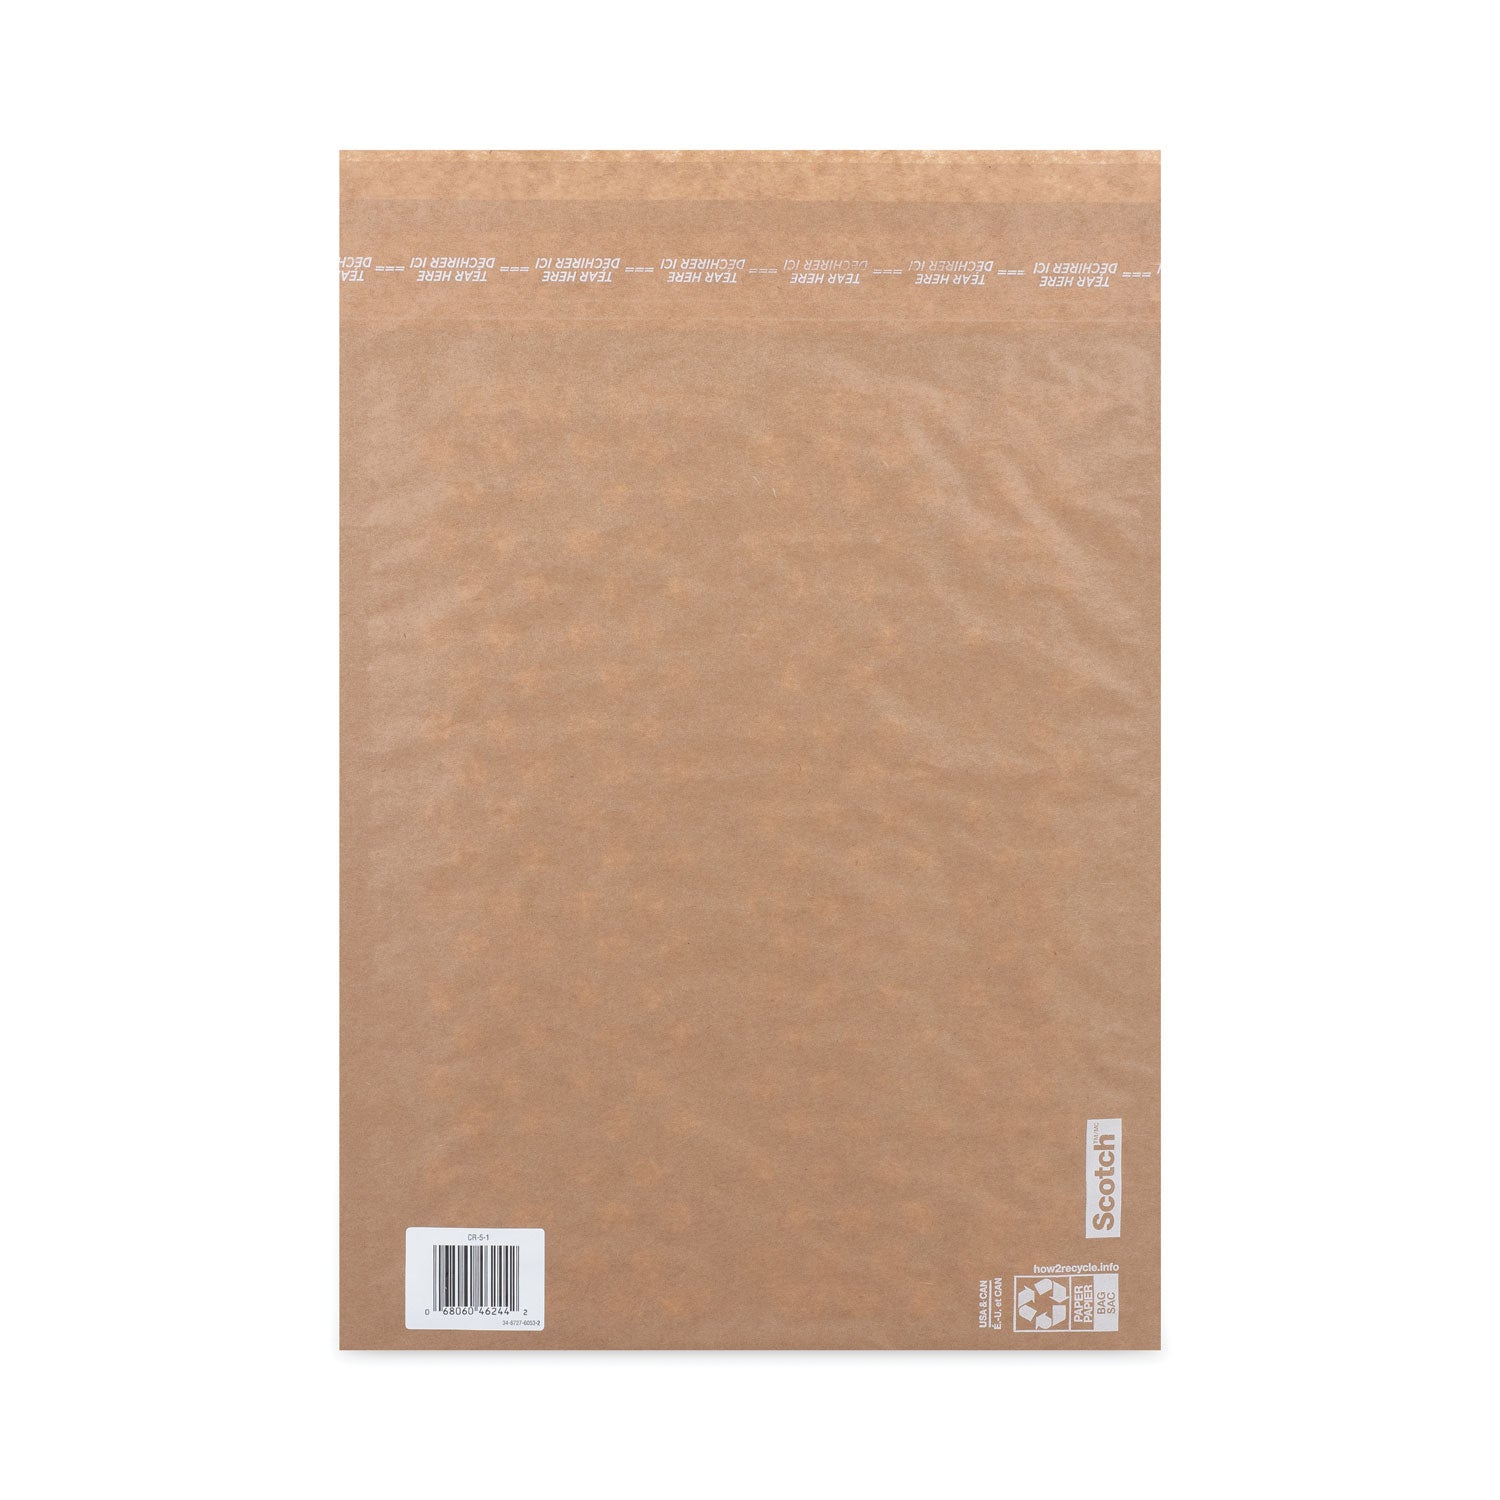 curbside-recyclable-padded-mailer-#5-bubble-cushion-self-adhesive-closure-12-x-1725-natural-kraft-100-carton_mmmcr51 - 2